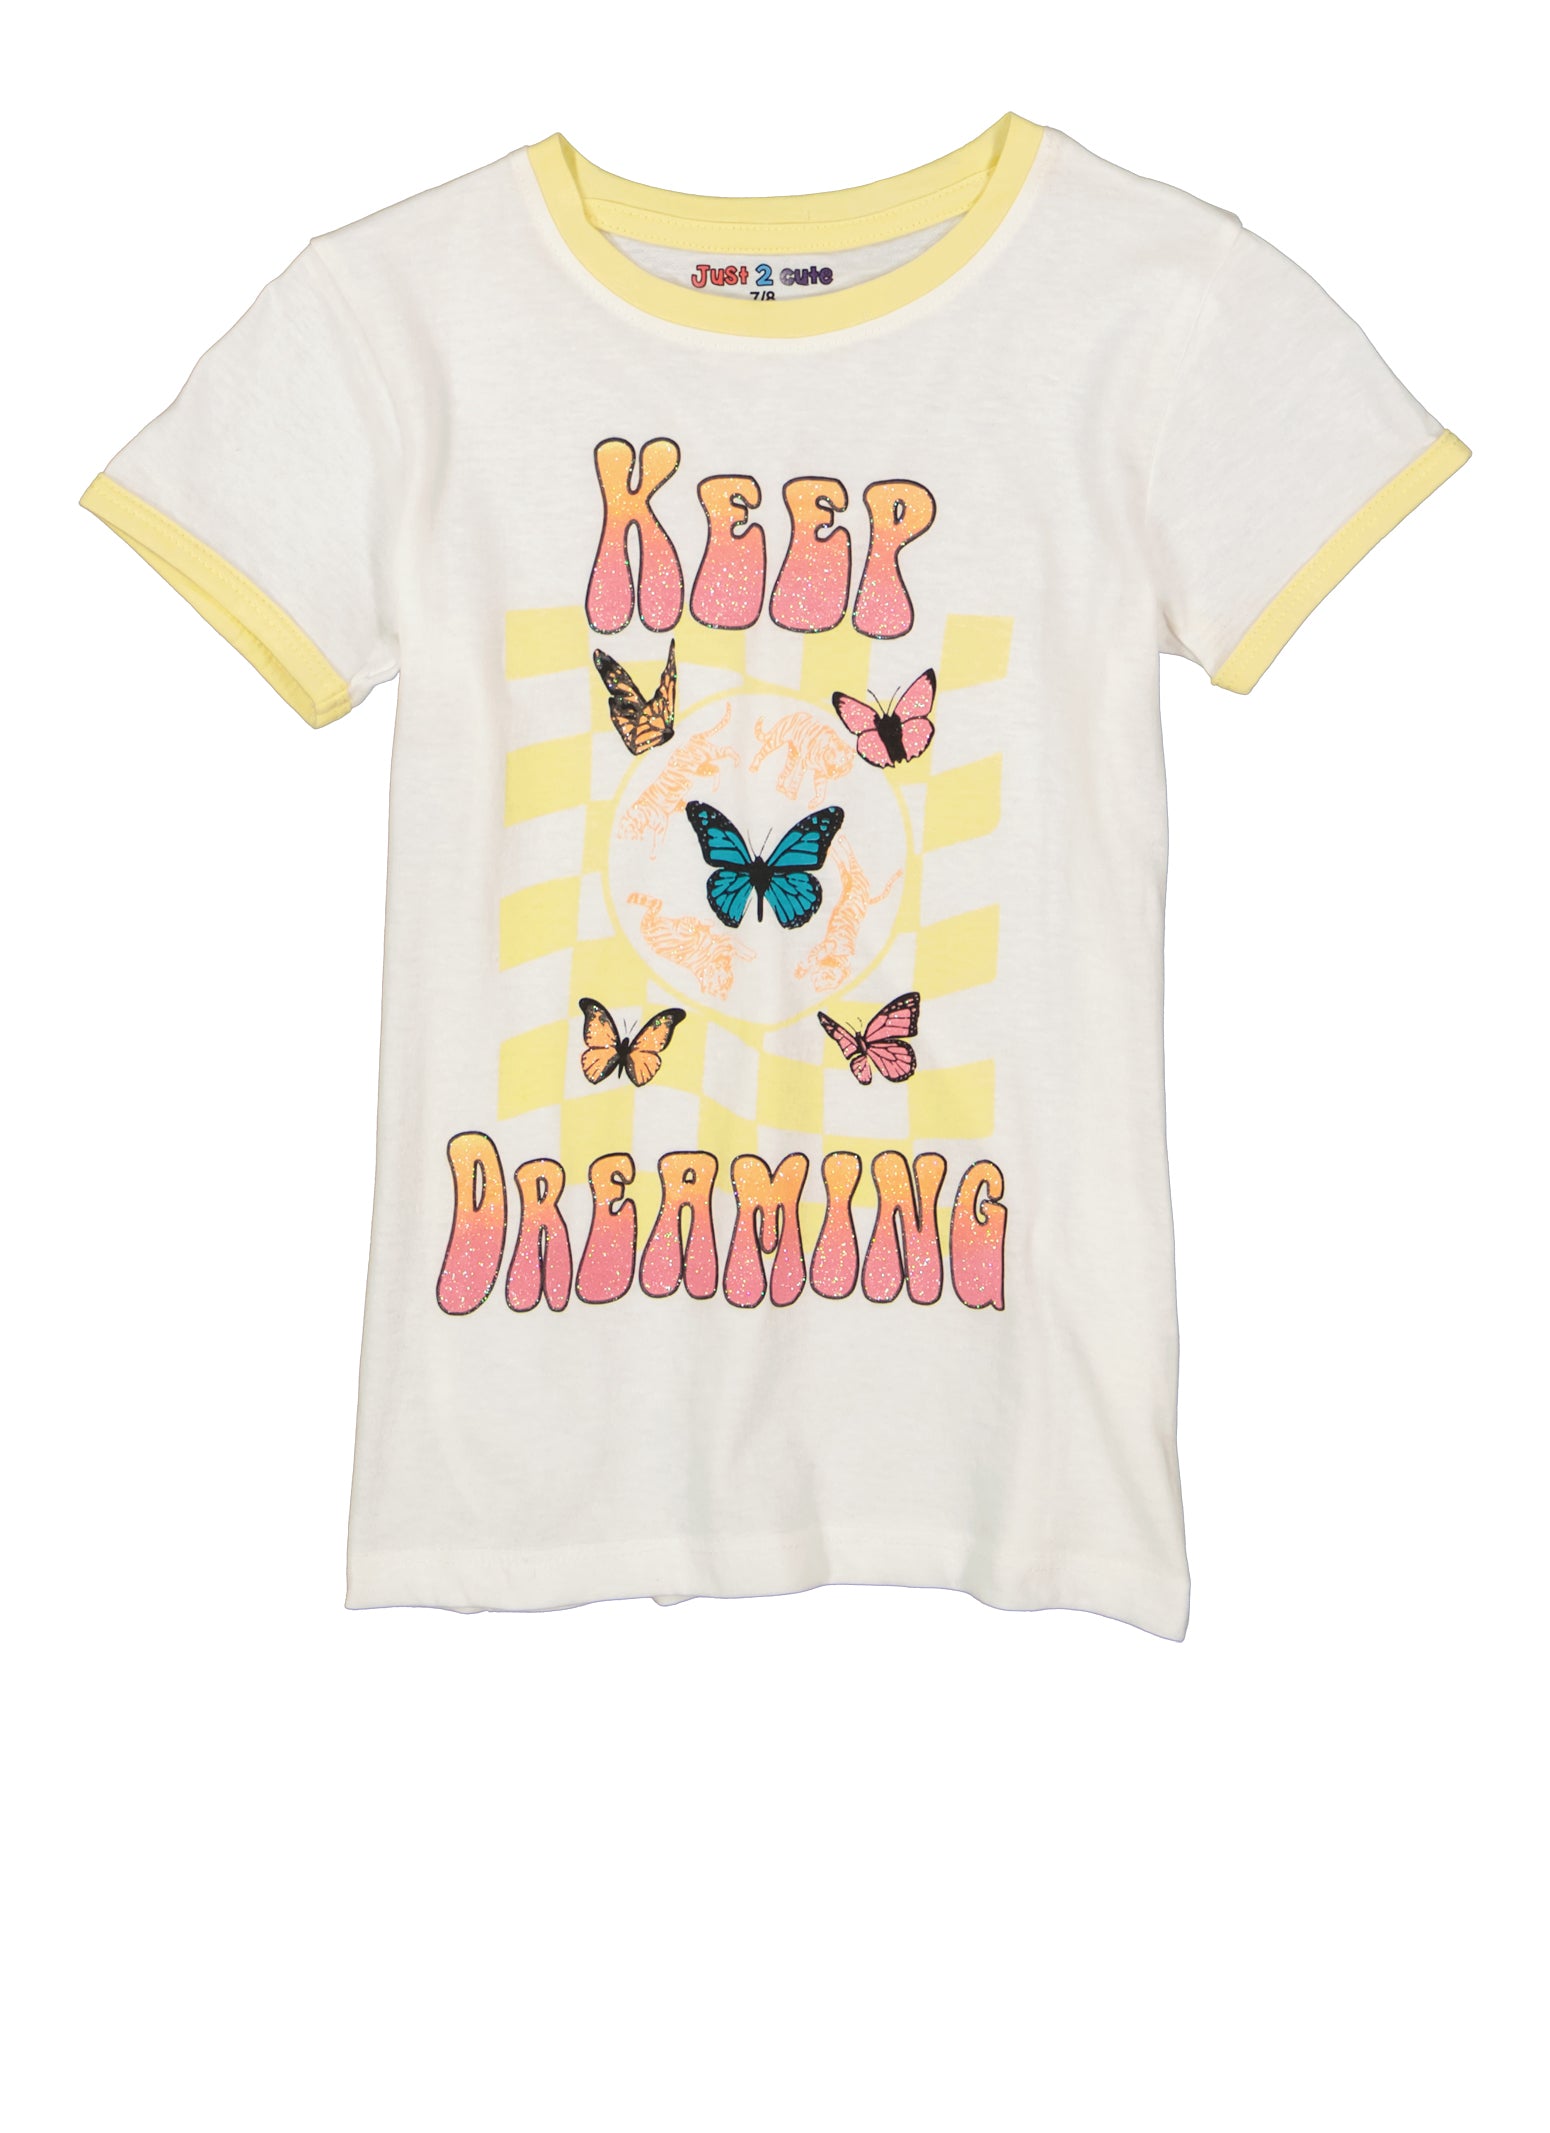 Girls Keep Dreaming Graphic Ringer Tee